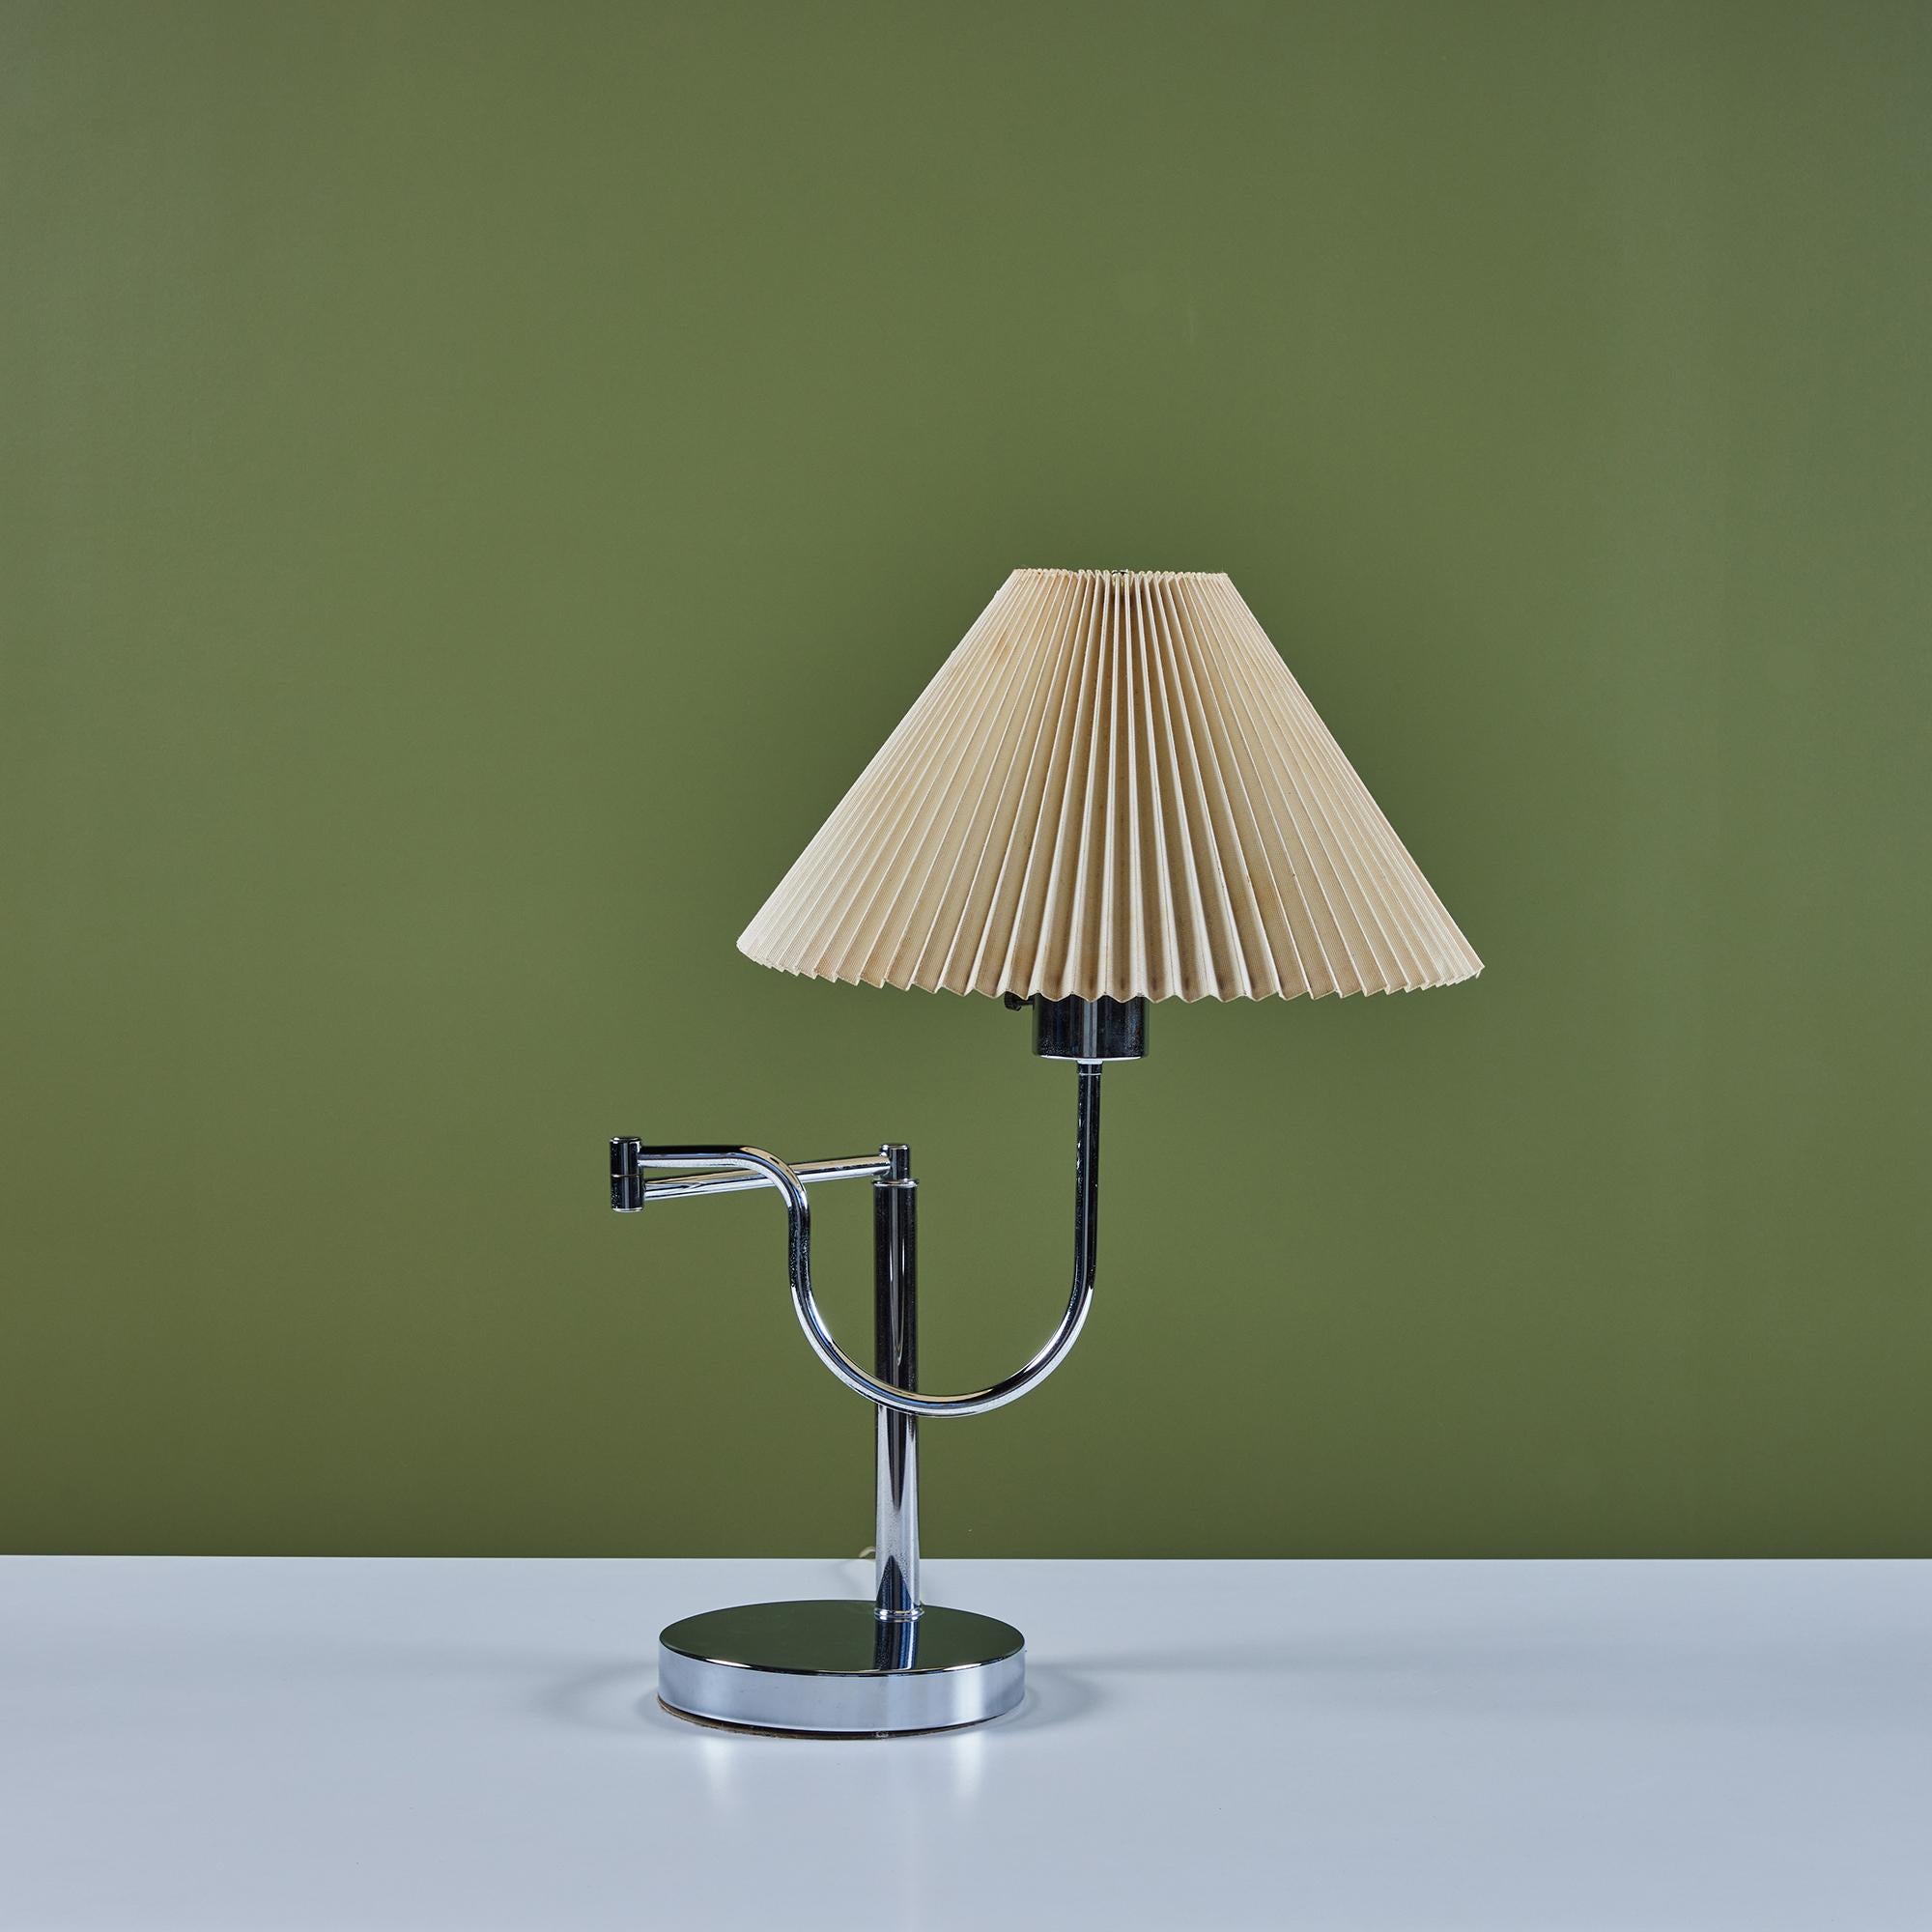 Walter von Nessen style table lamp c.1960s, USA. The table lamp features a curved chrome and stainless body with articulating arm.

Dimensions
19